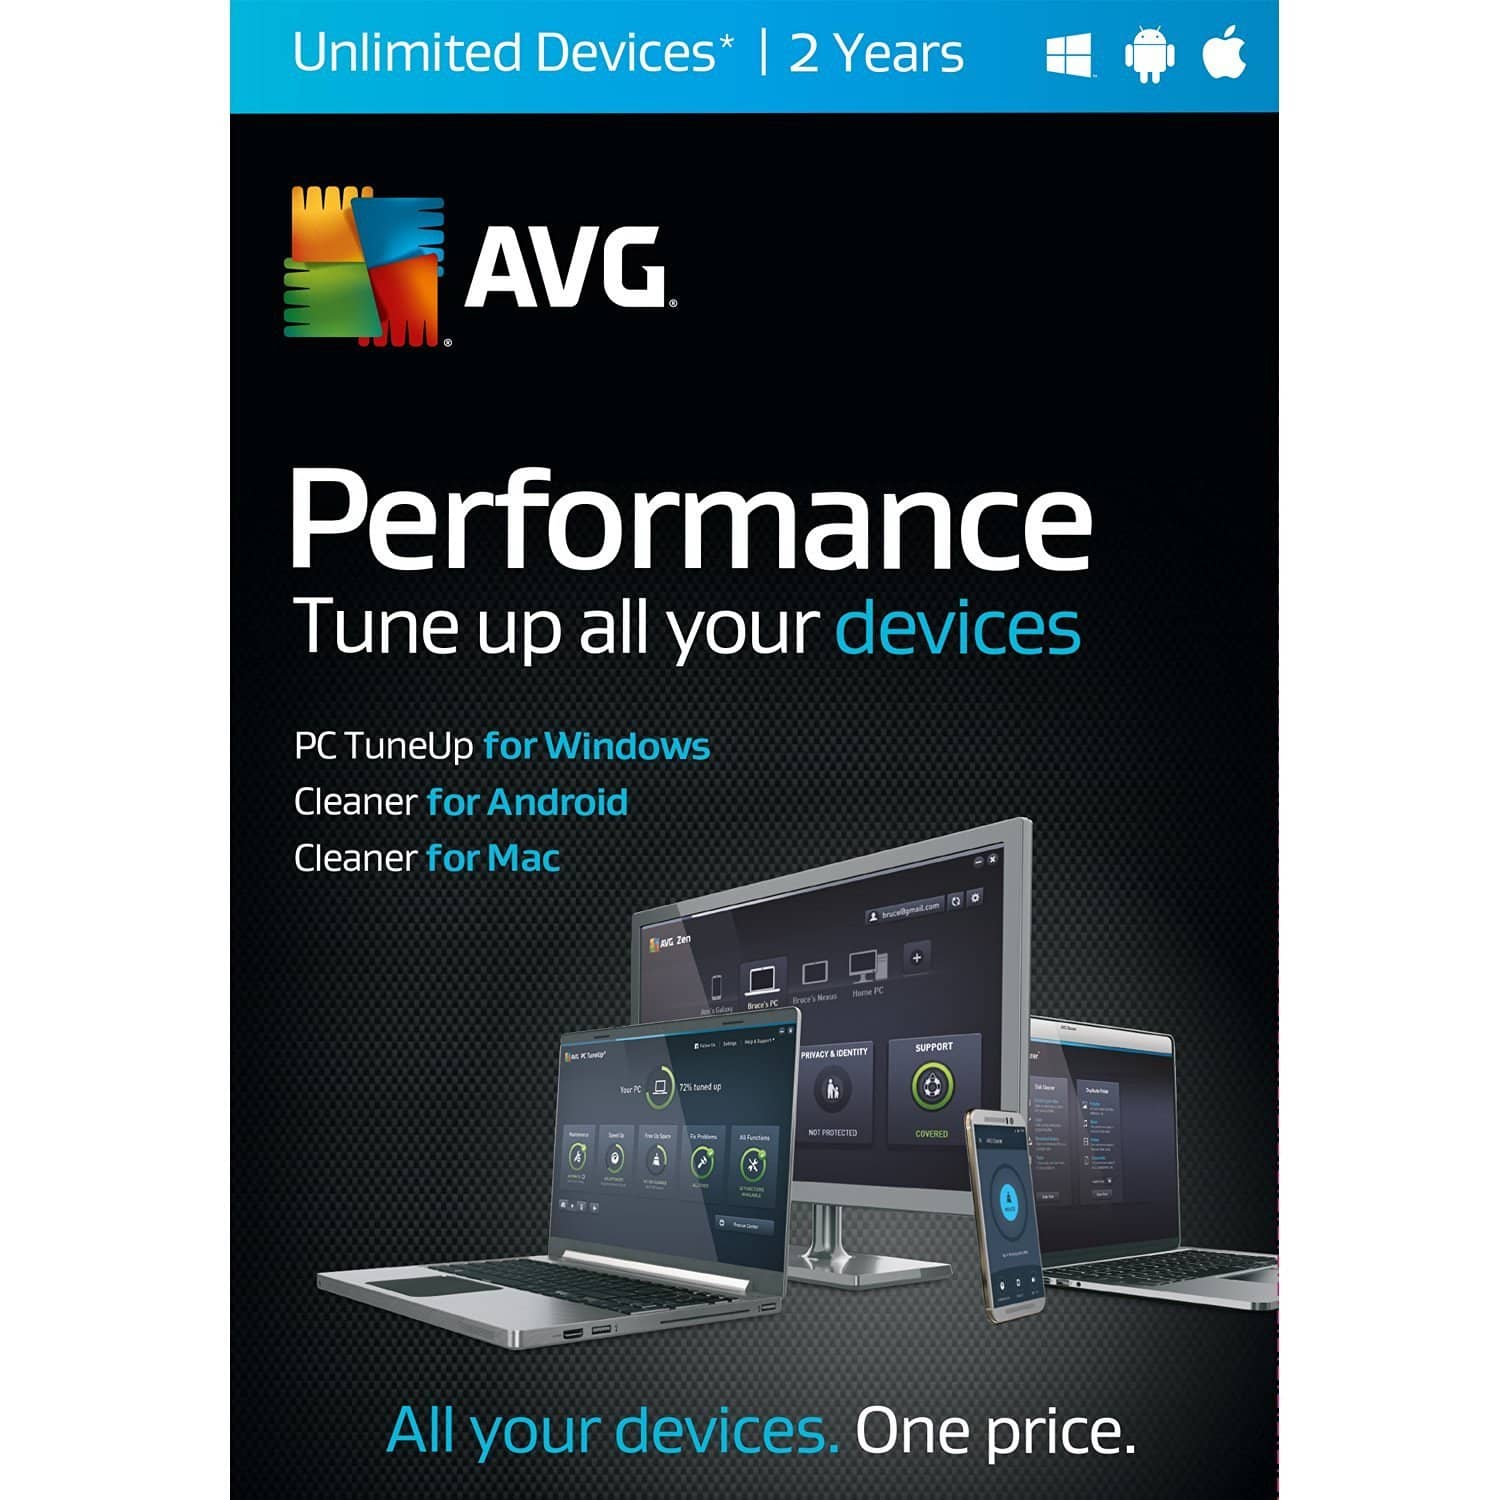 AVG Performance | Unlimited Devices| 2 Years